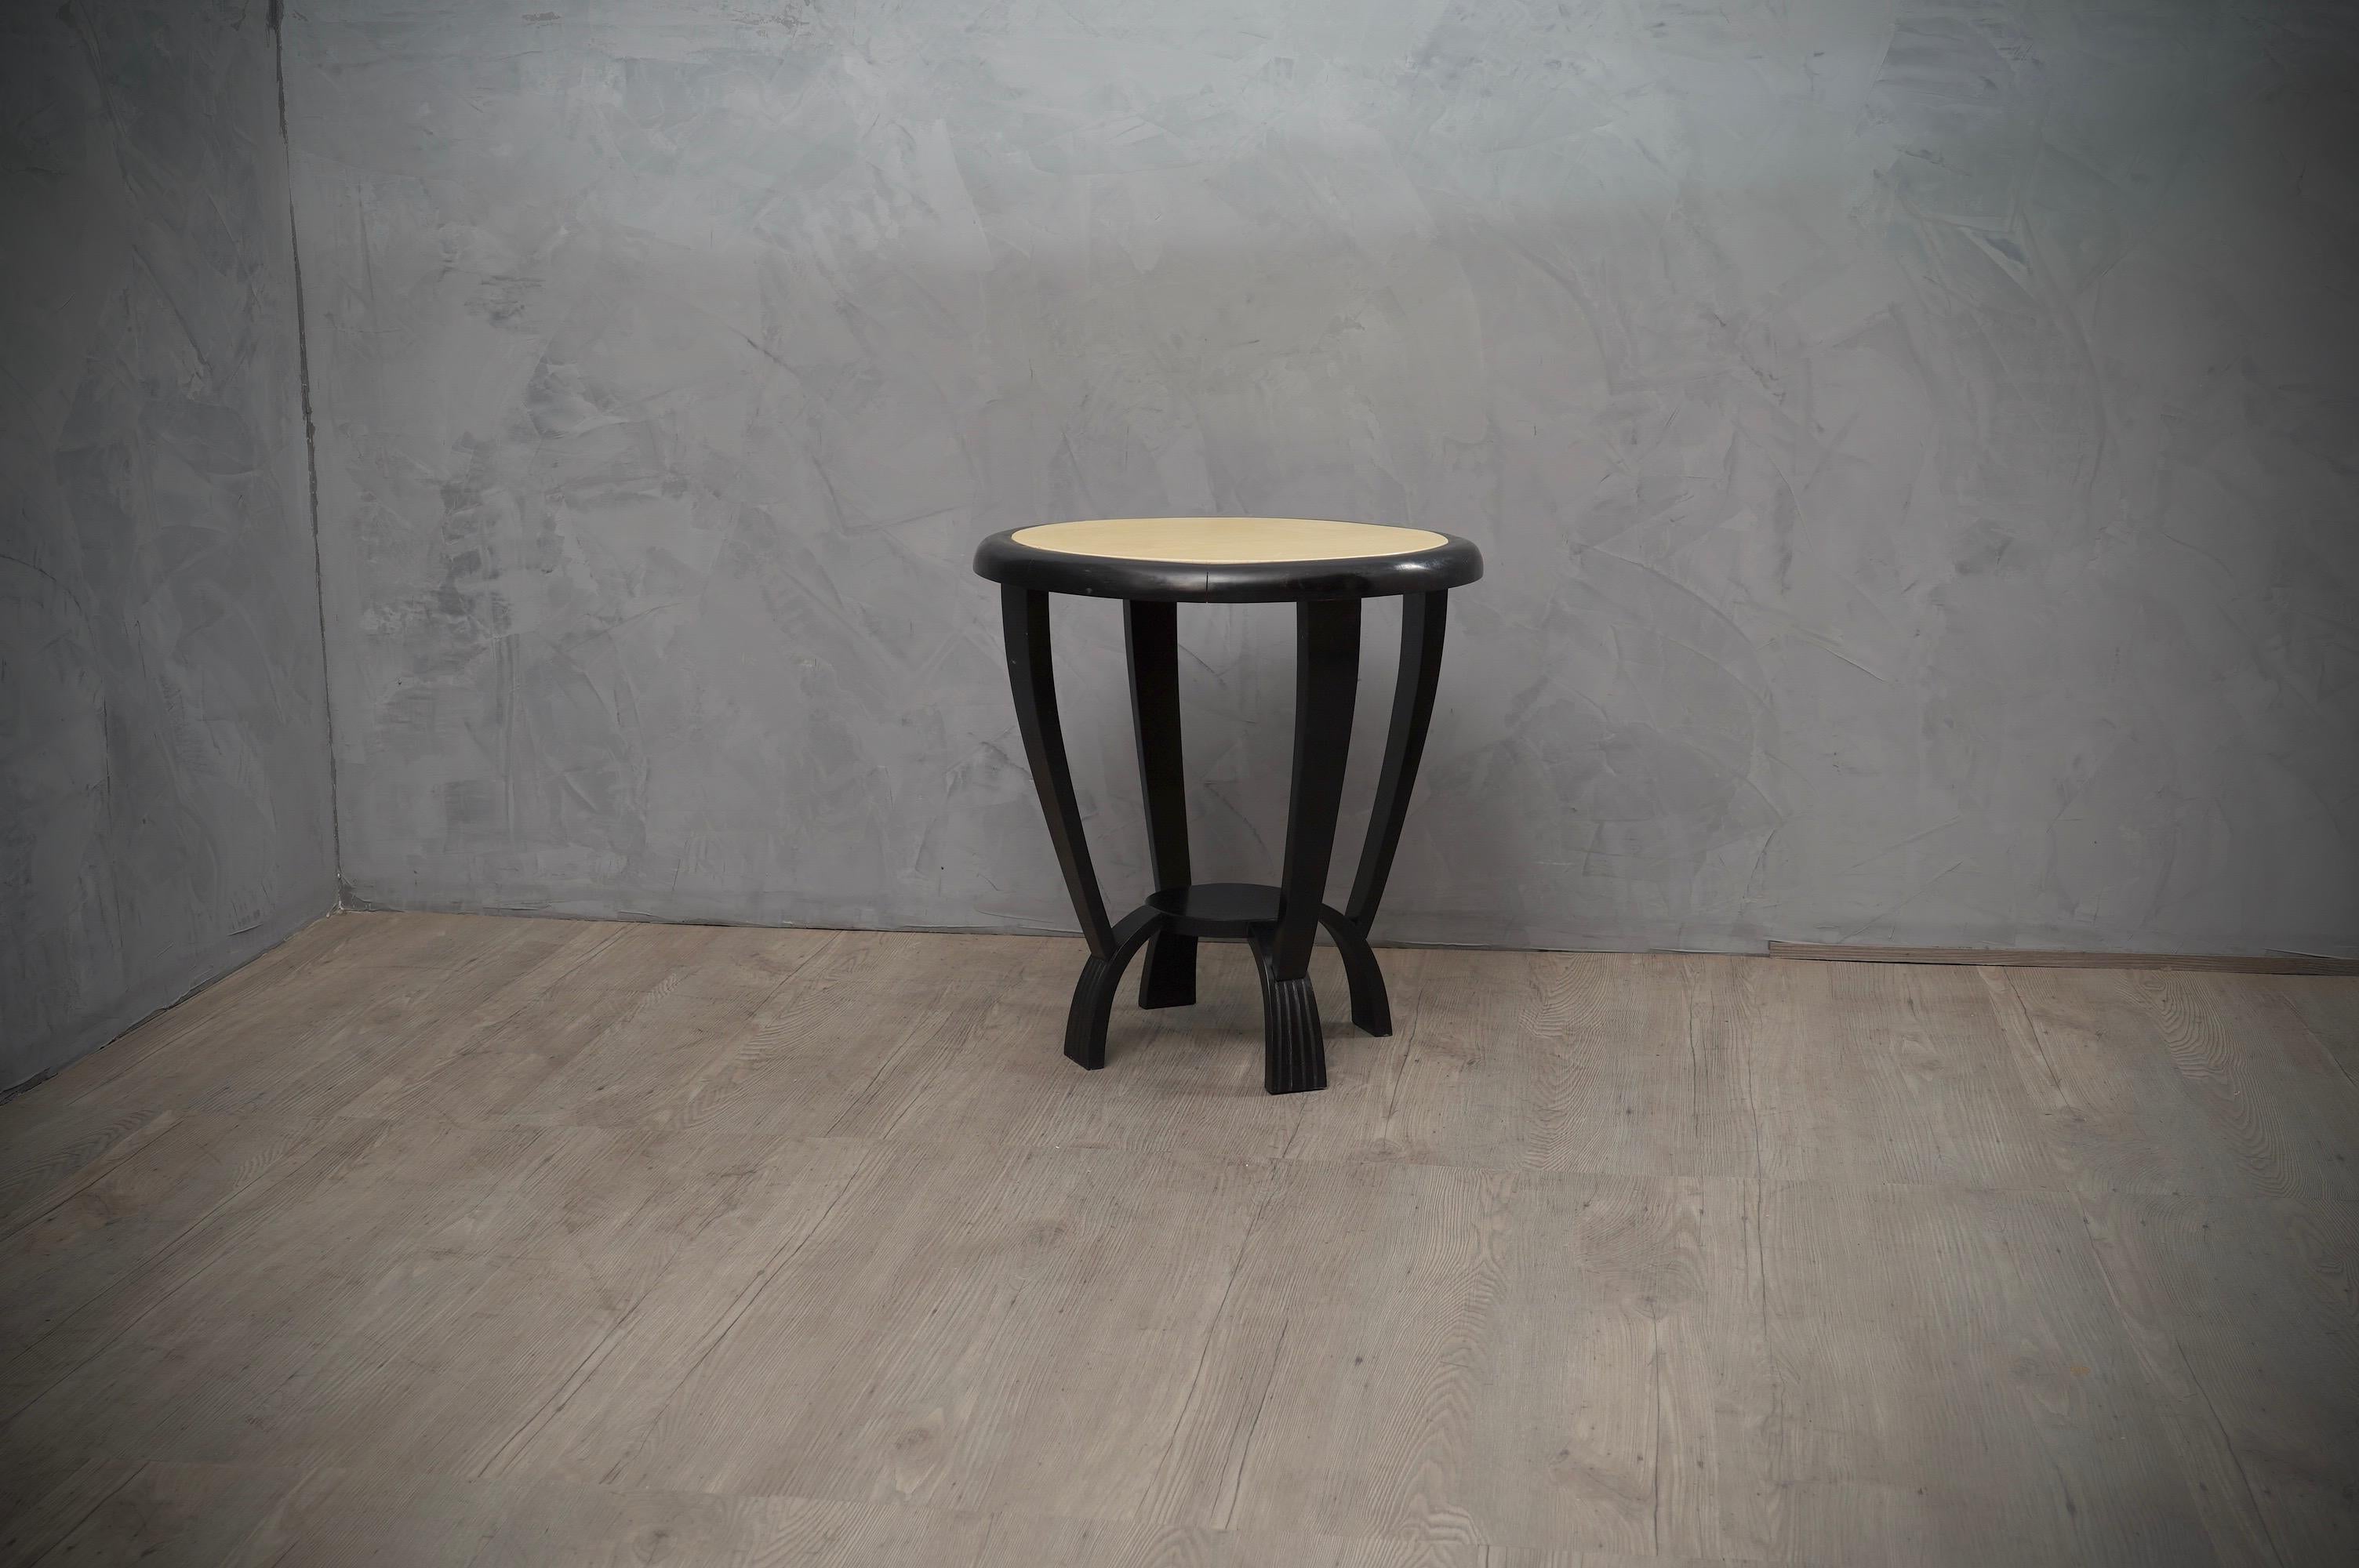 Rich design for this couple of side tables, polished with black shellac and covered with goatskin.

Top is covered in parchment leather, and then well-polished. A single piece of leather for the top table, even more difficult to find, very